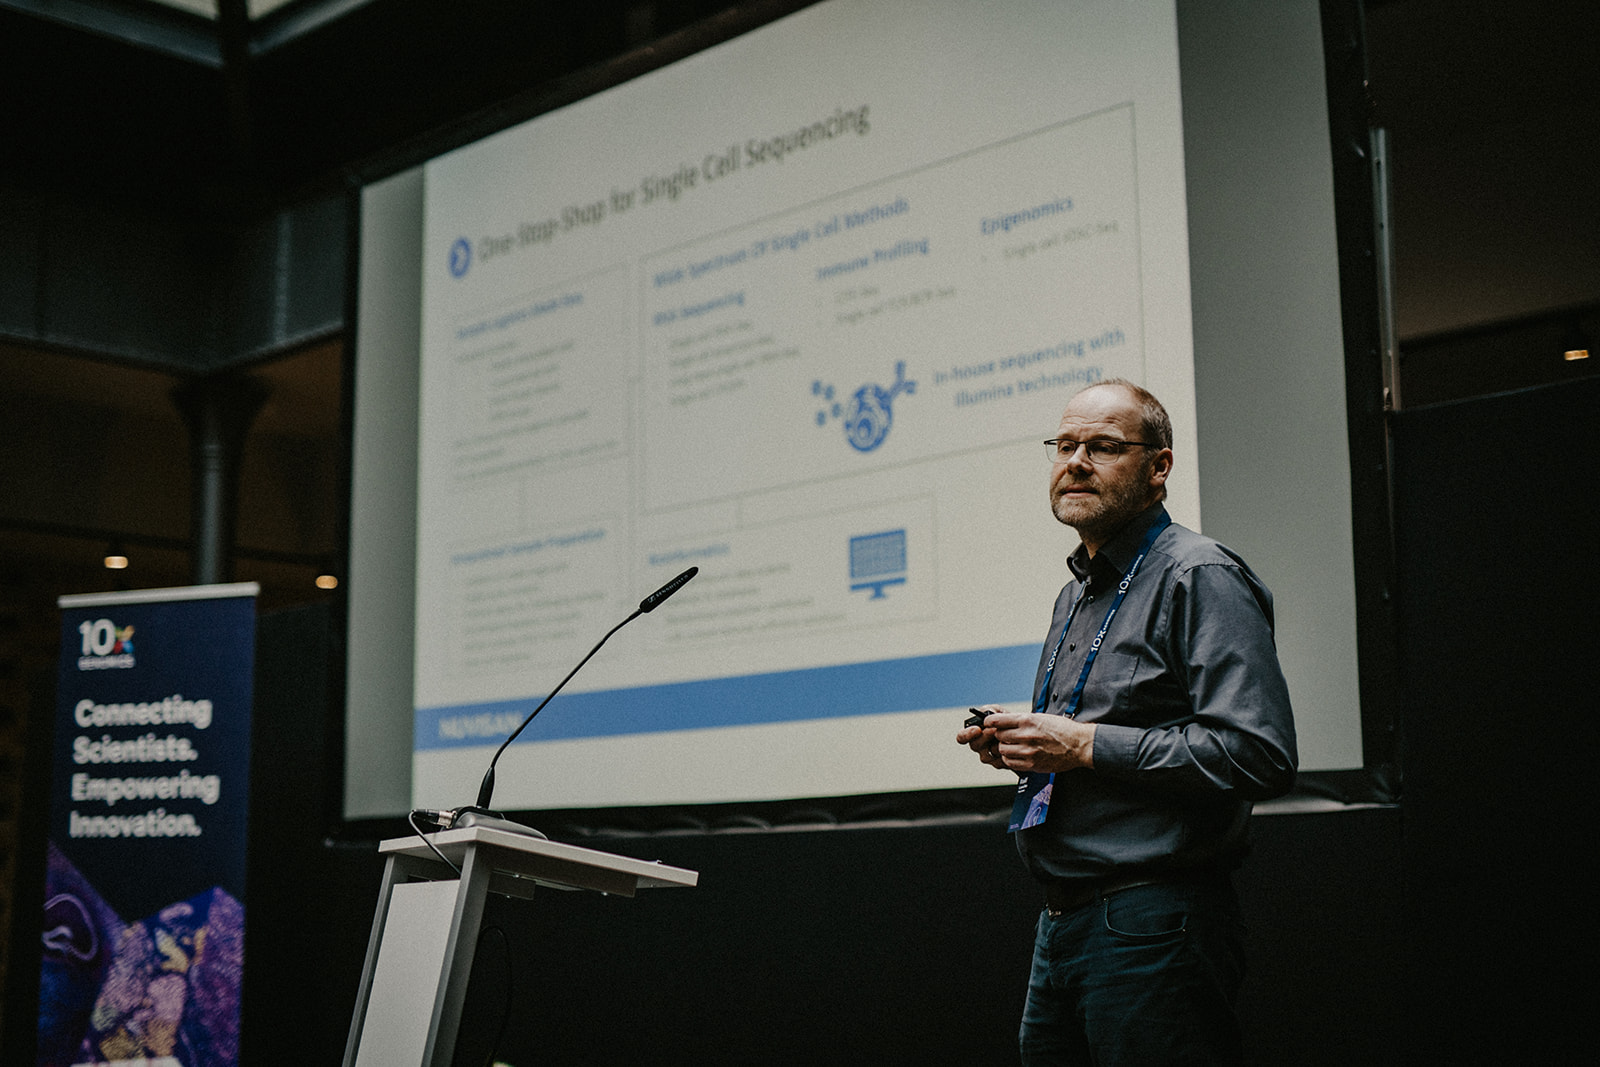 Ralf Lesche, PhD, speaking at the 10x Genomics Single Cell & Spatial Discovery Symposium in Berlin.